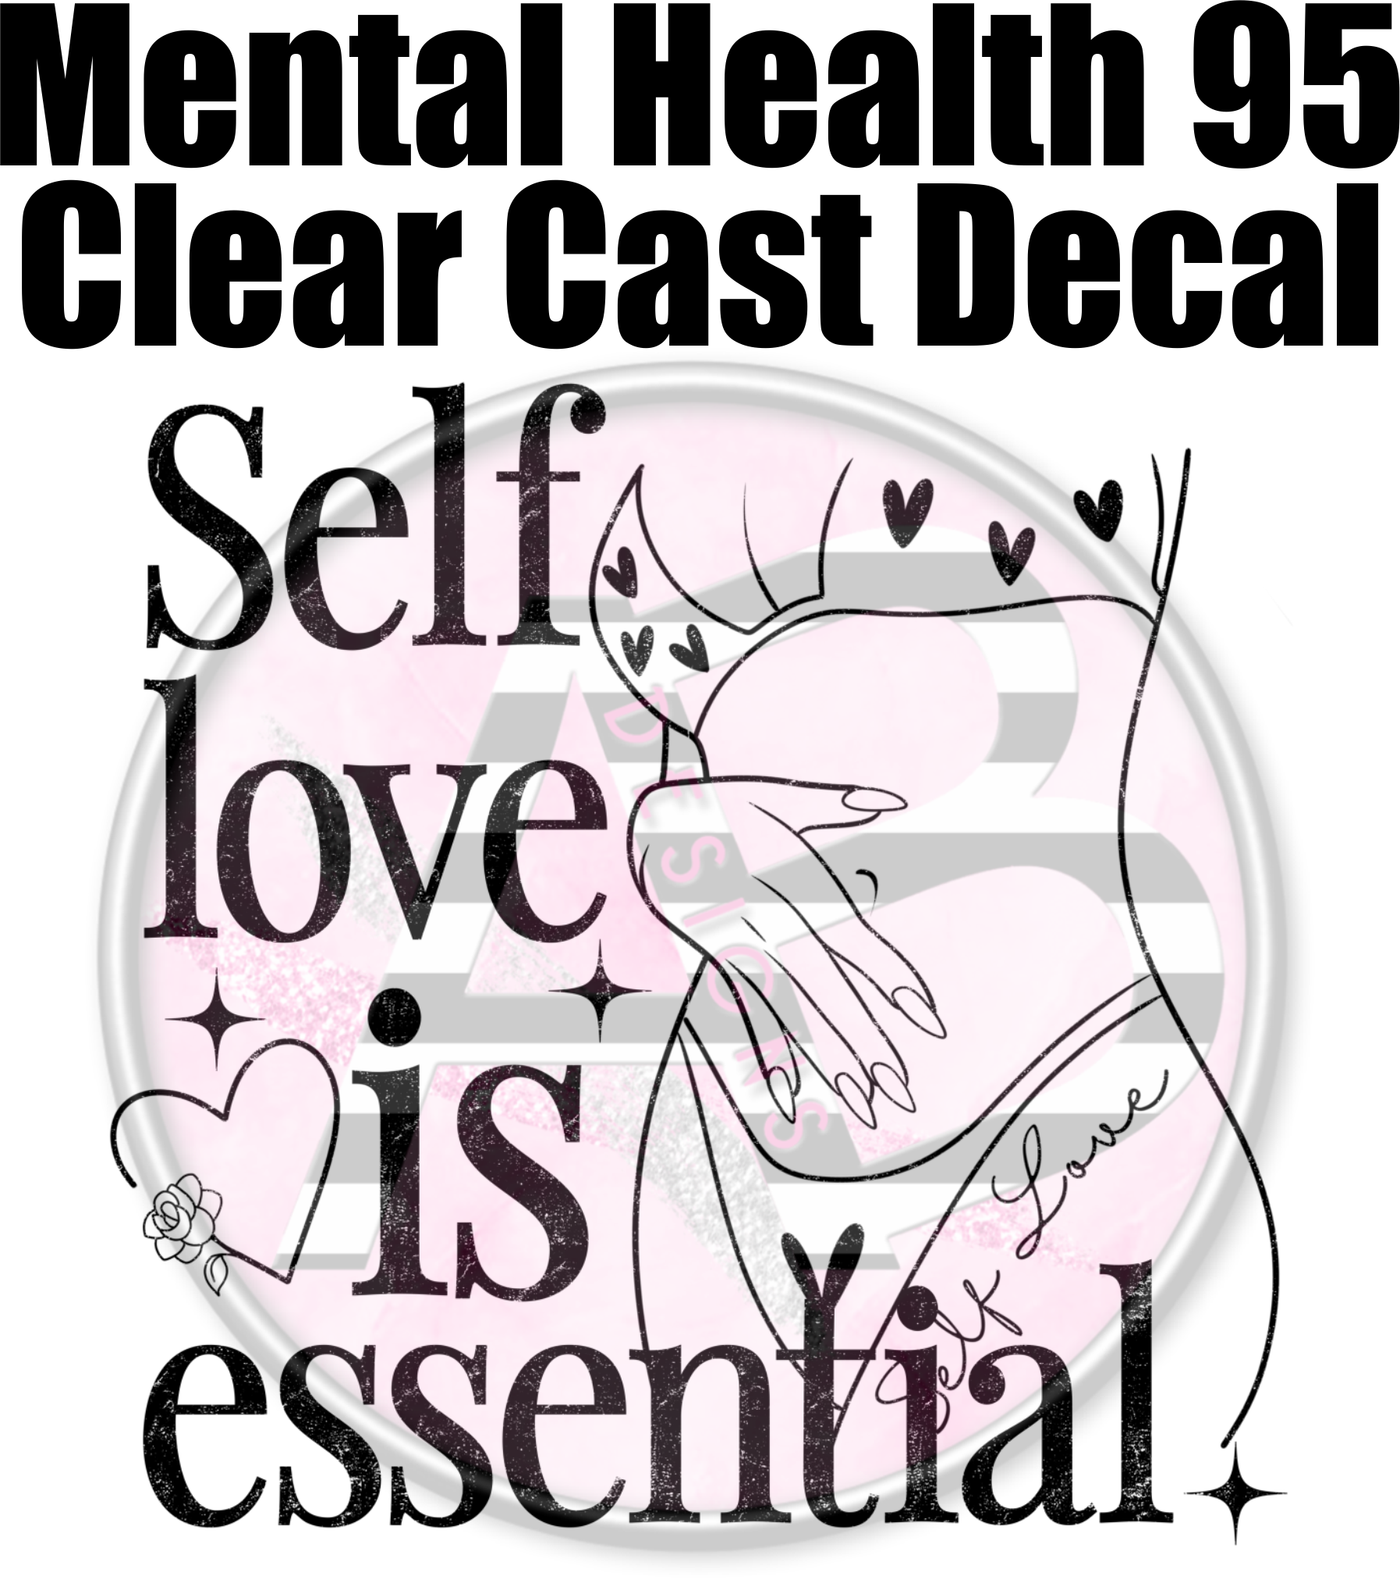 Mental Health 95 - Clear Cast Decal-564